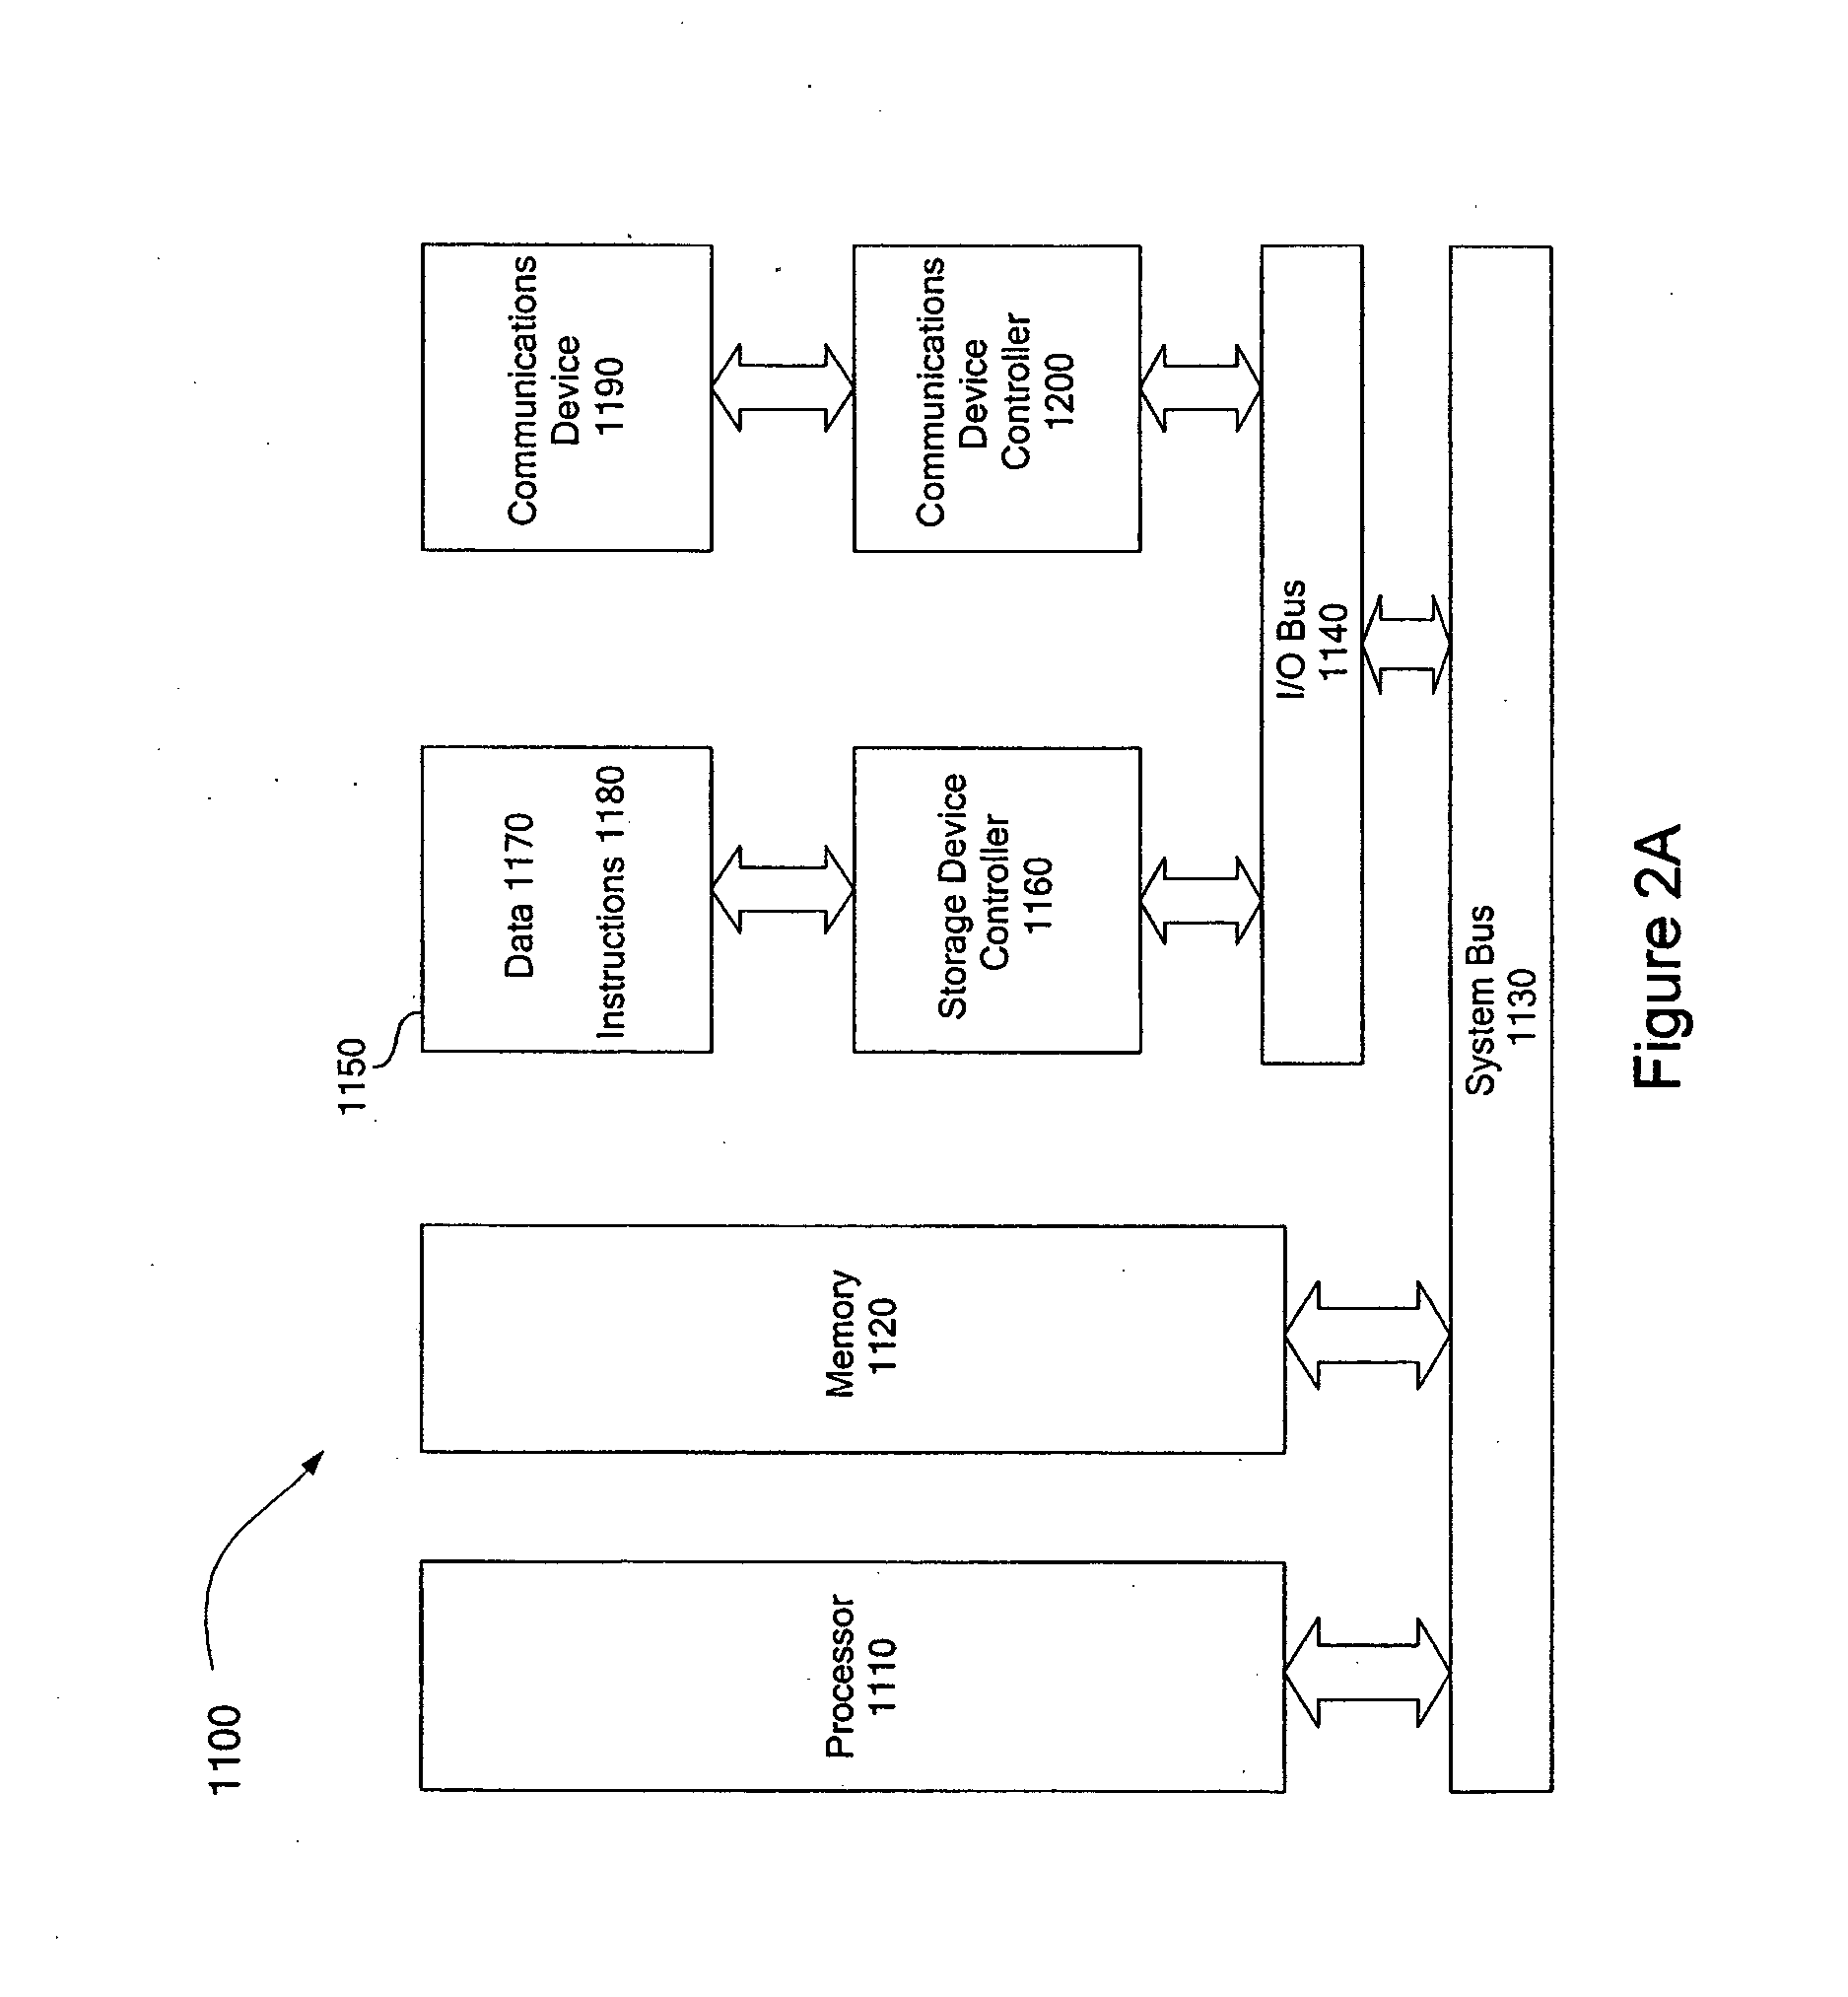 Differentiated services using weighted quality of service (QoS)